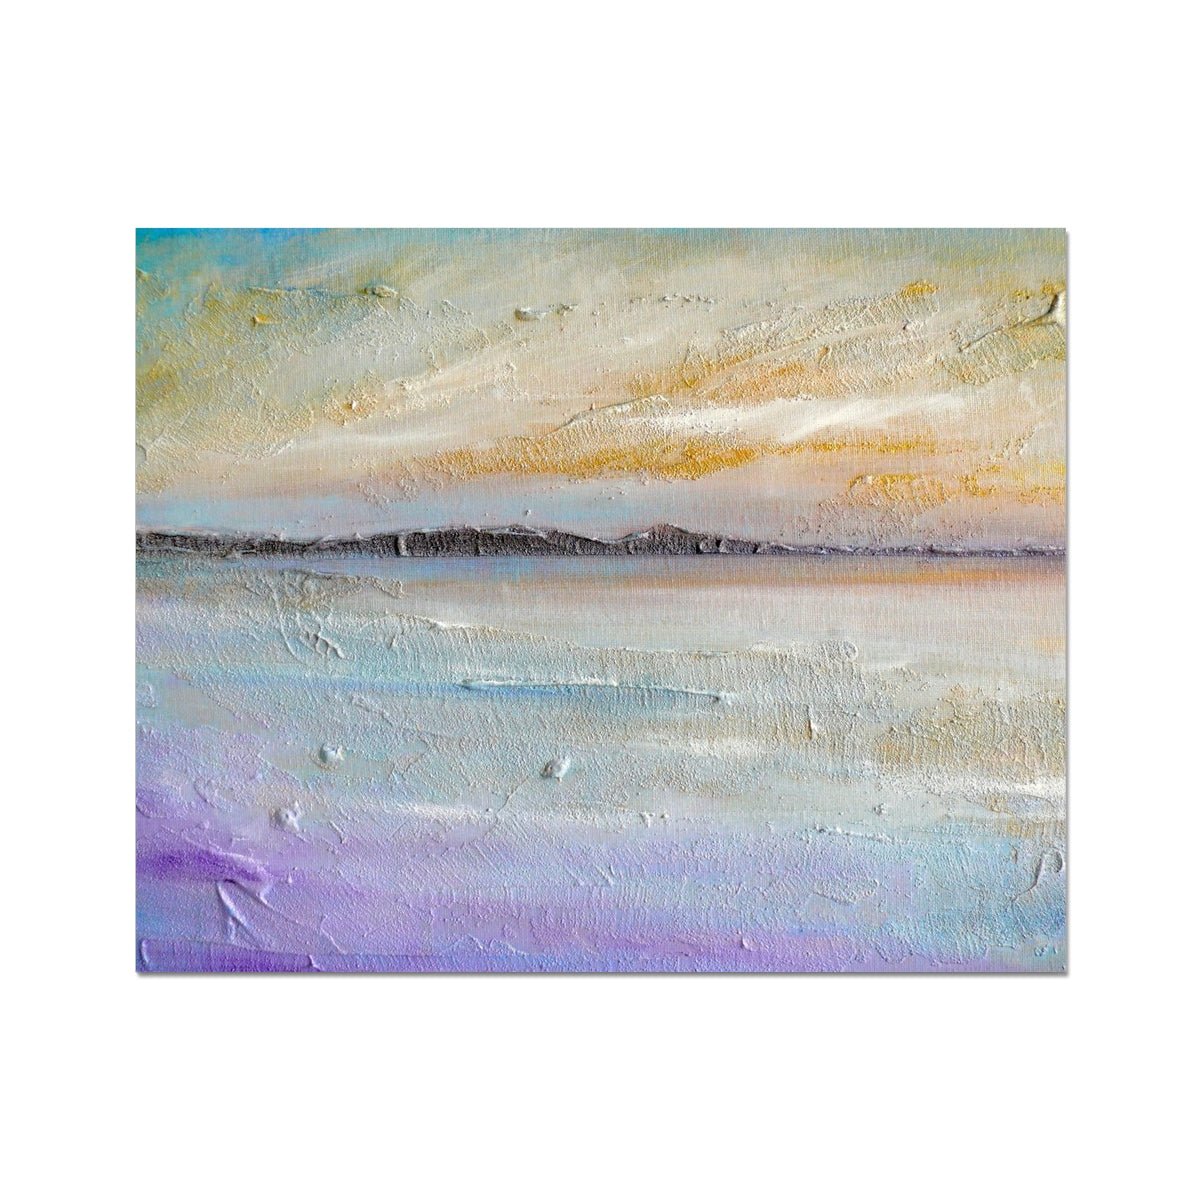 Sollas Beach North Uist Painting | Artist Proof Collector Prints From Scotland-Artist Proof Collector Prints-Hebridean Islands Art Gallery-20"x16"-Paintings, Prints, Homeware, Art Gifts From Scotland By Scottish Artist Kevin Hunter